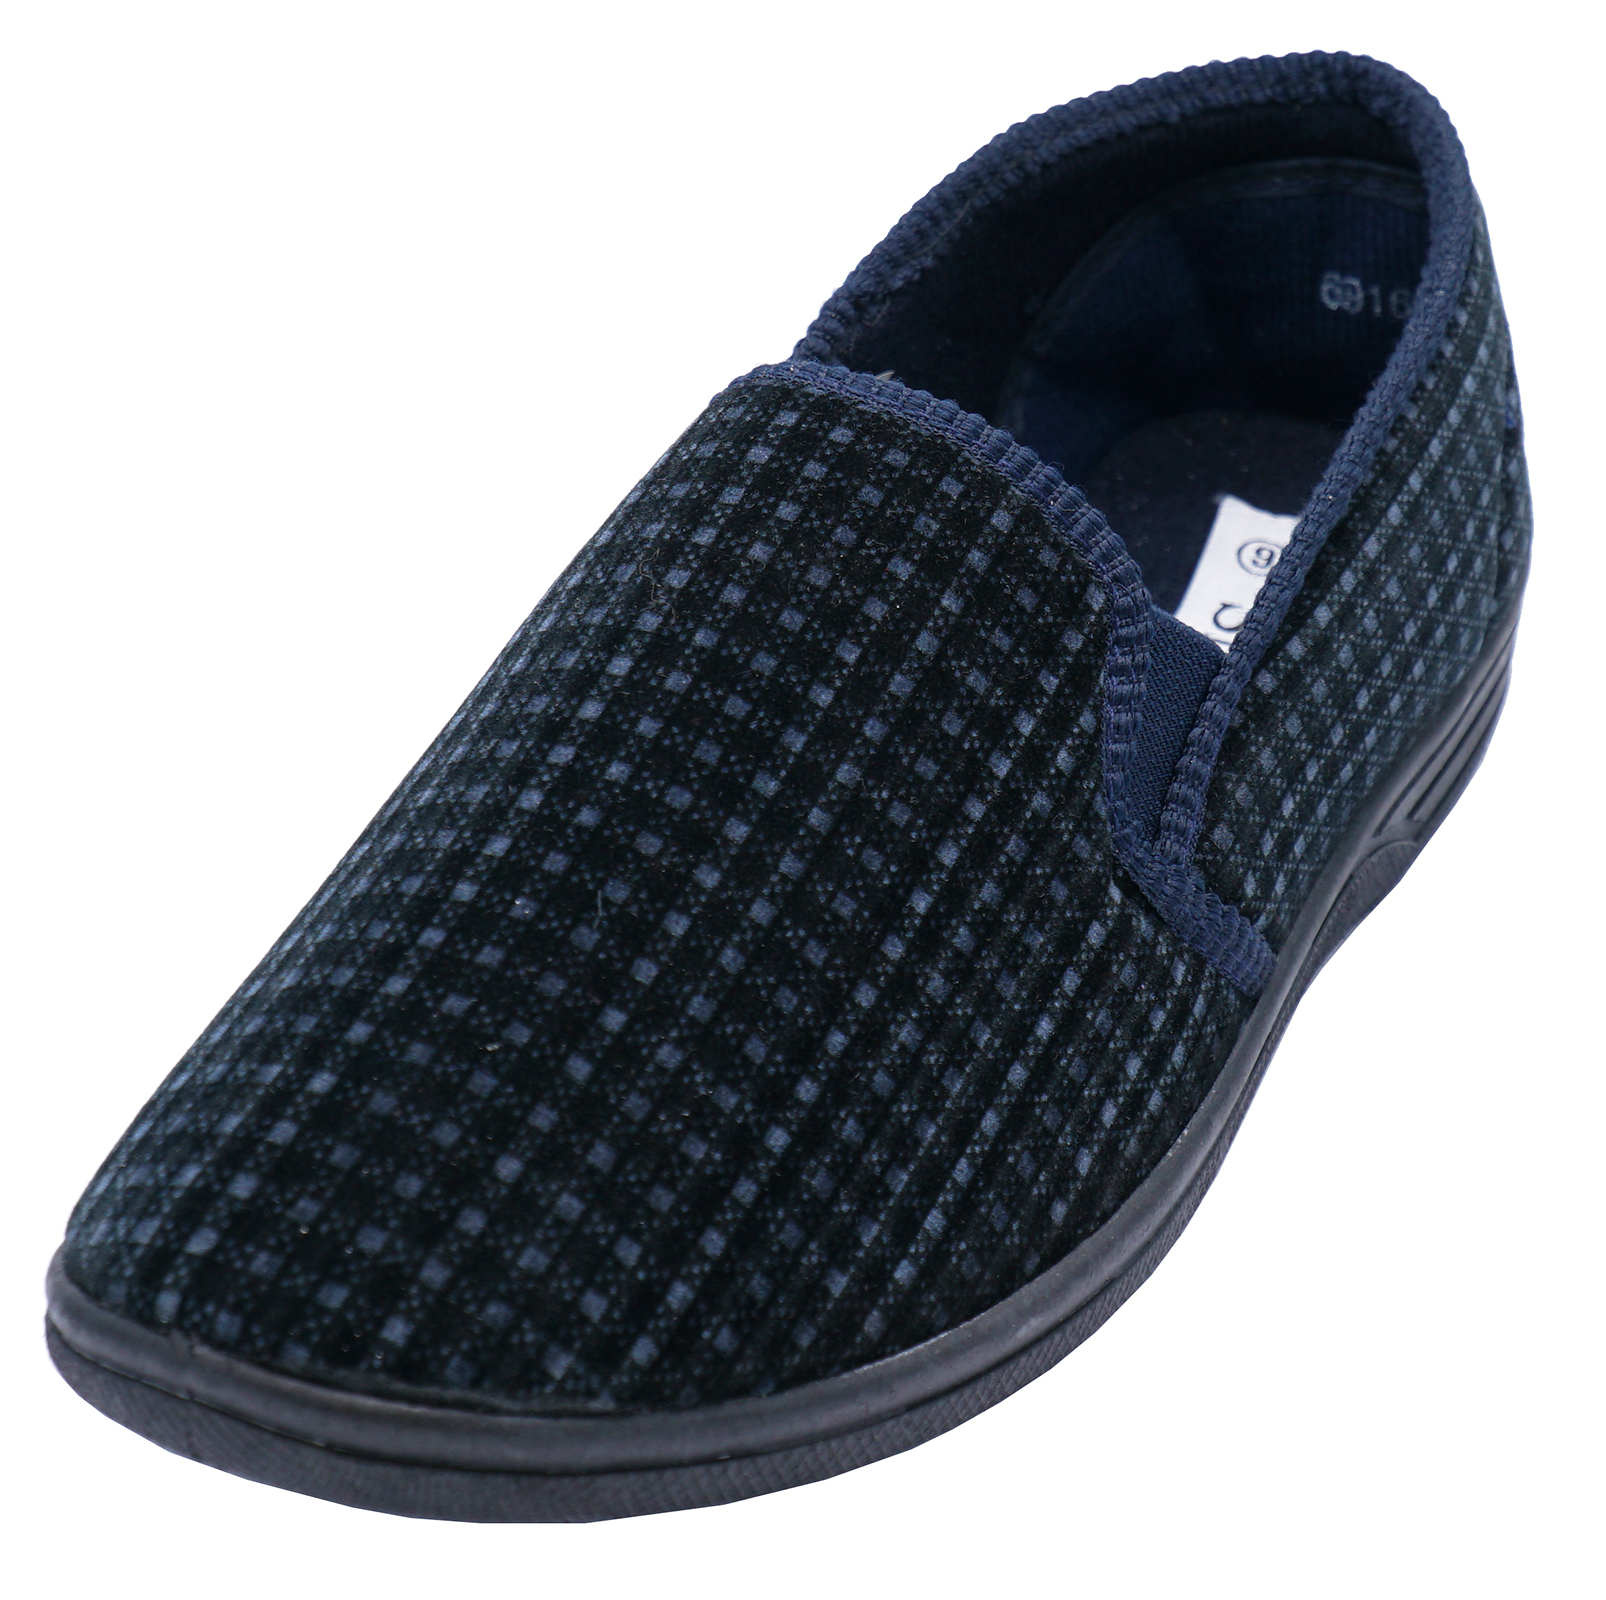 MENS NAVY COMFORTABLE SLIPPERS SLIP-ON INDOOR OUTDOOR FLAT HOUSE SHOES ...